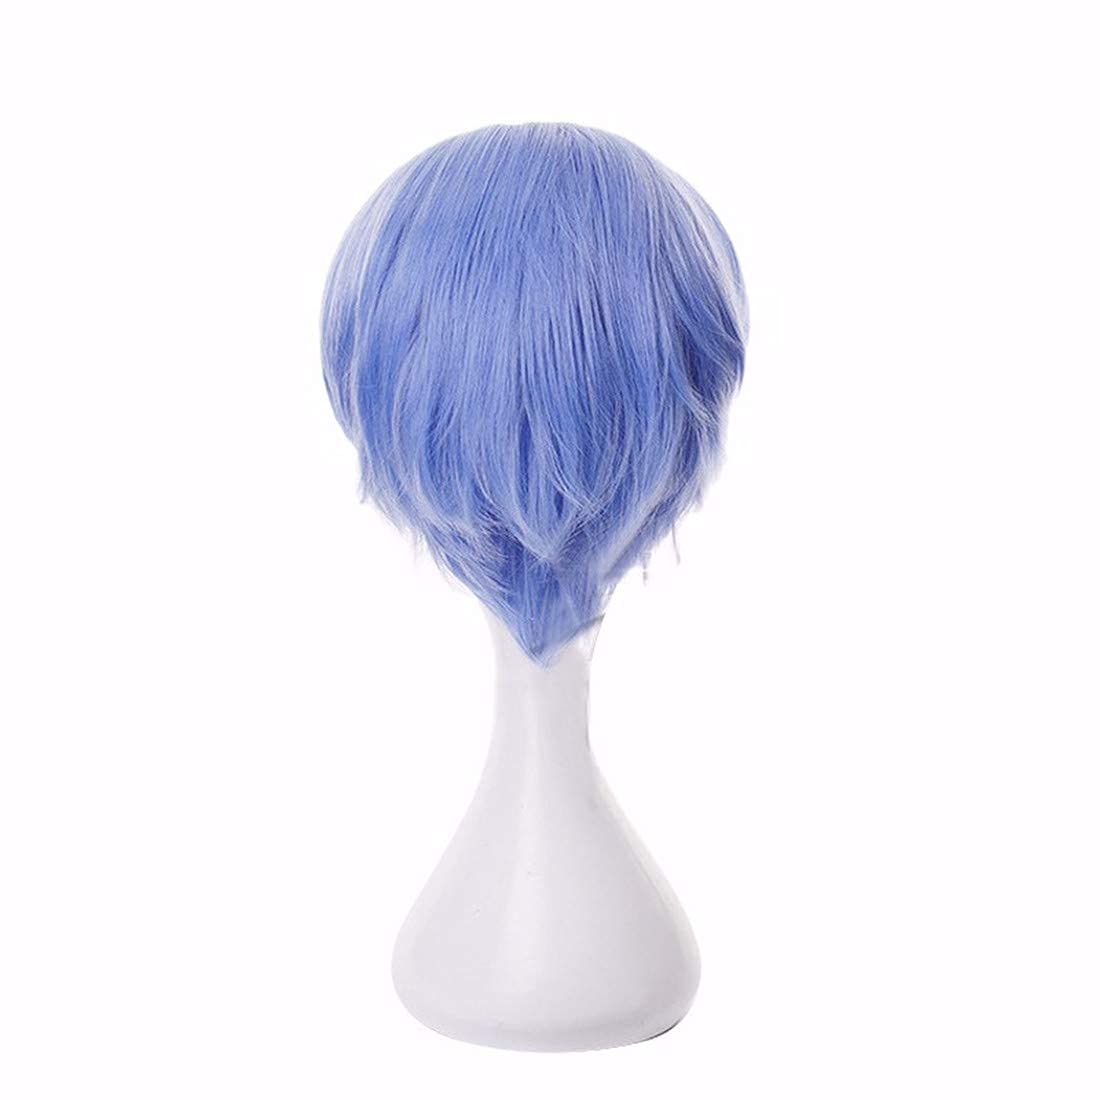 Langa Hasegawa Cosplay Wig Gradient Blue Short Hair: Ride the Wave of Style!